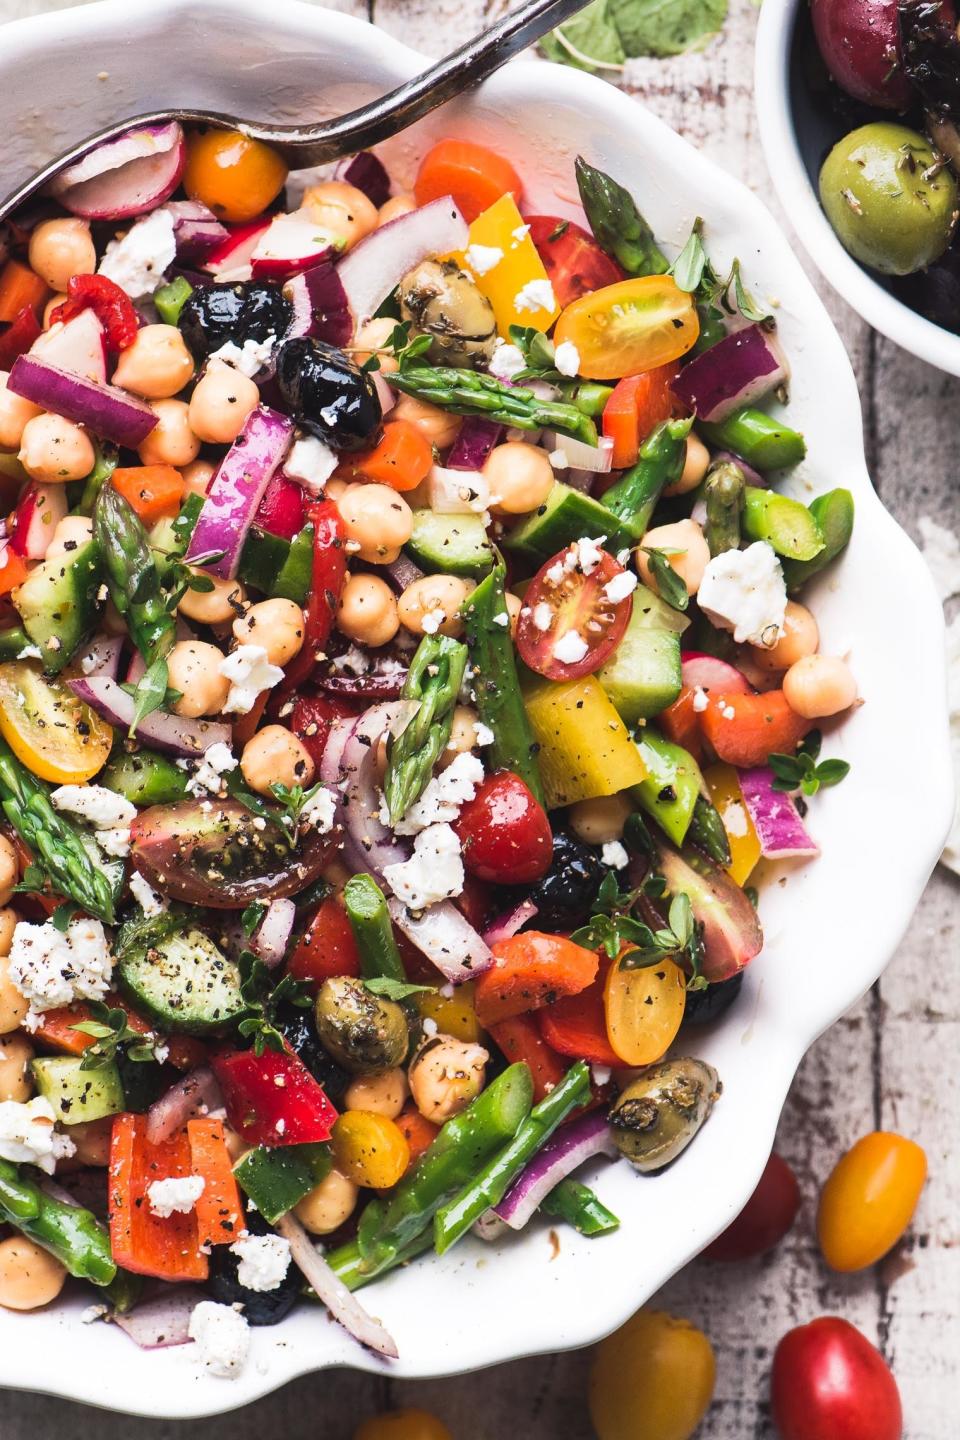 Asparagus salad with colorful vegetables, chickpeas, and feta.